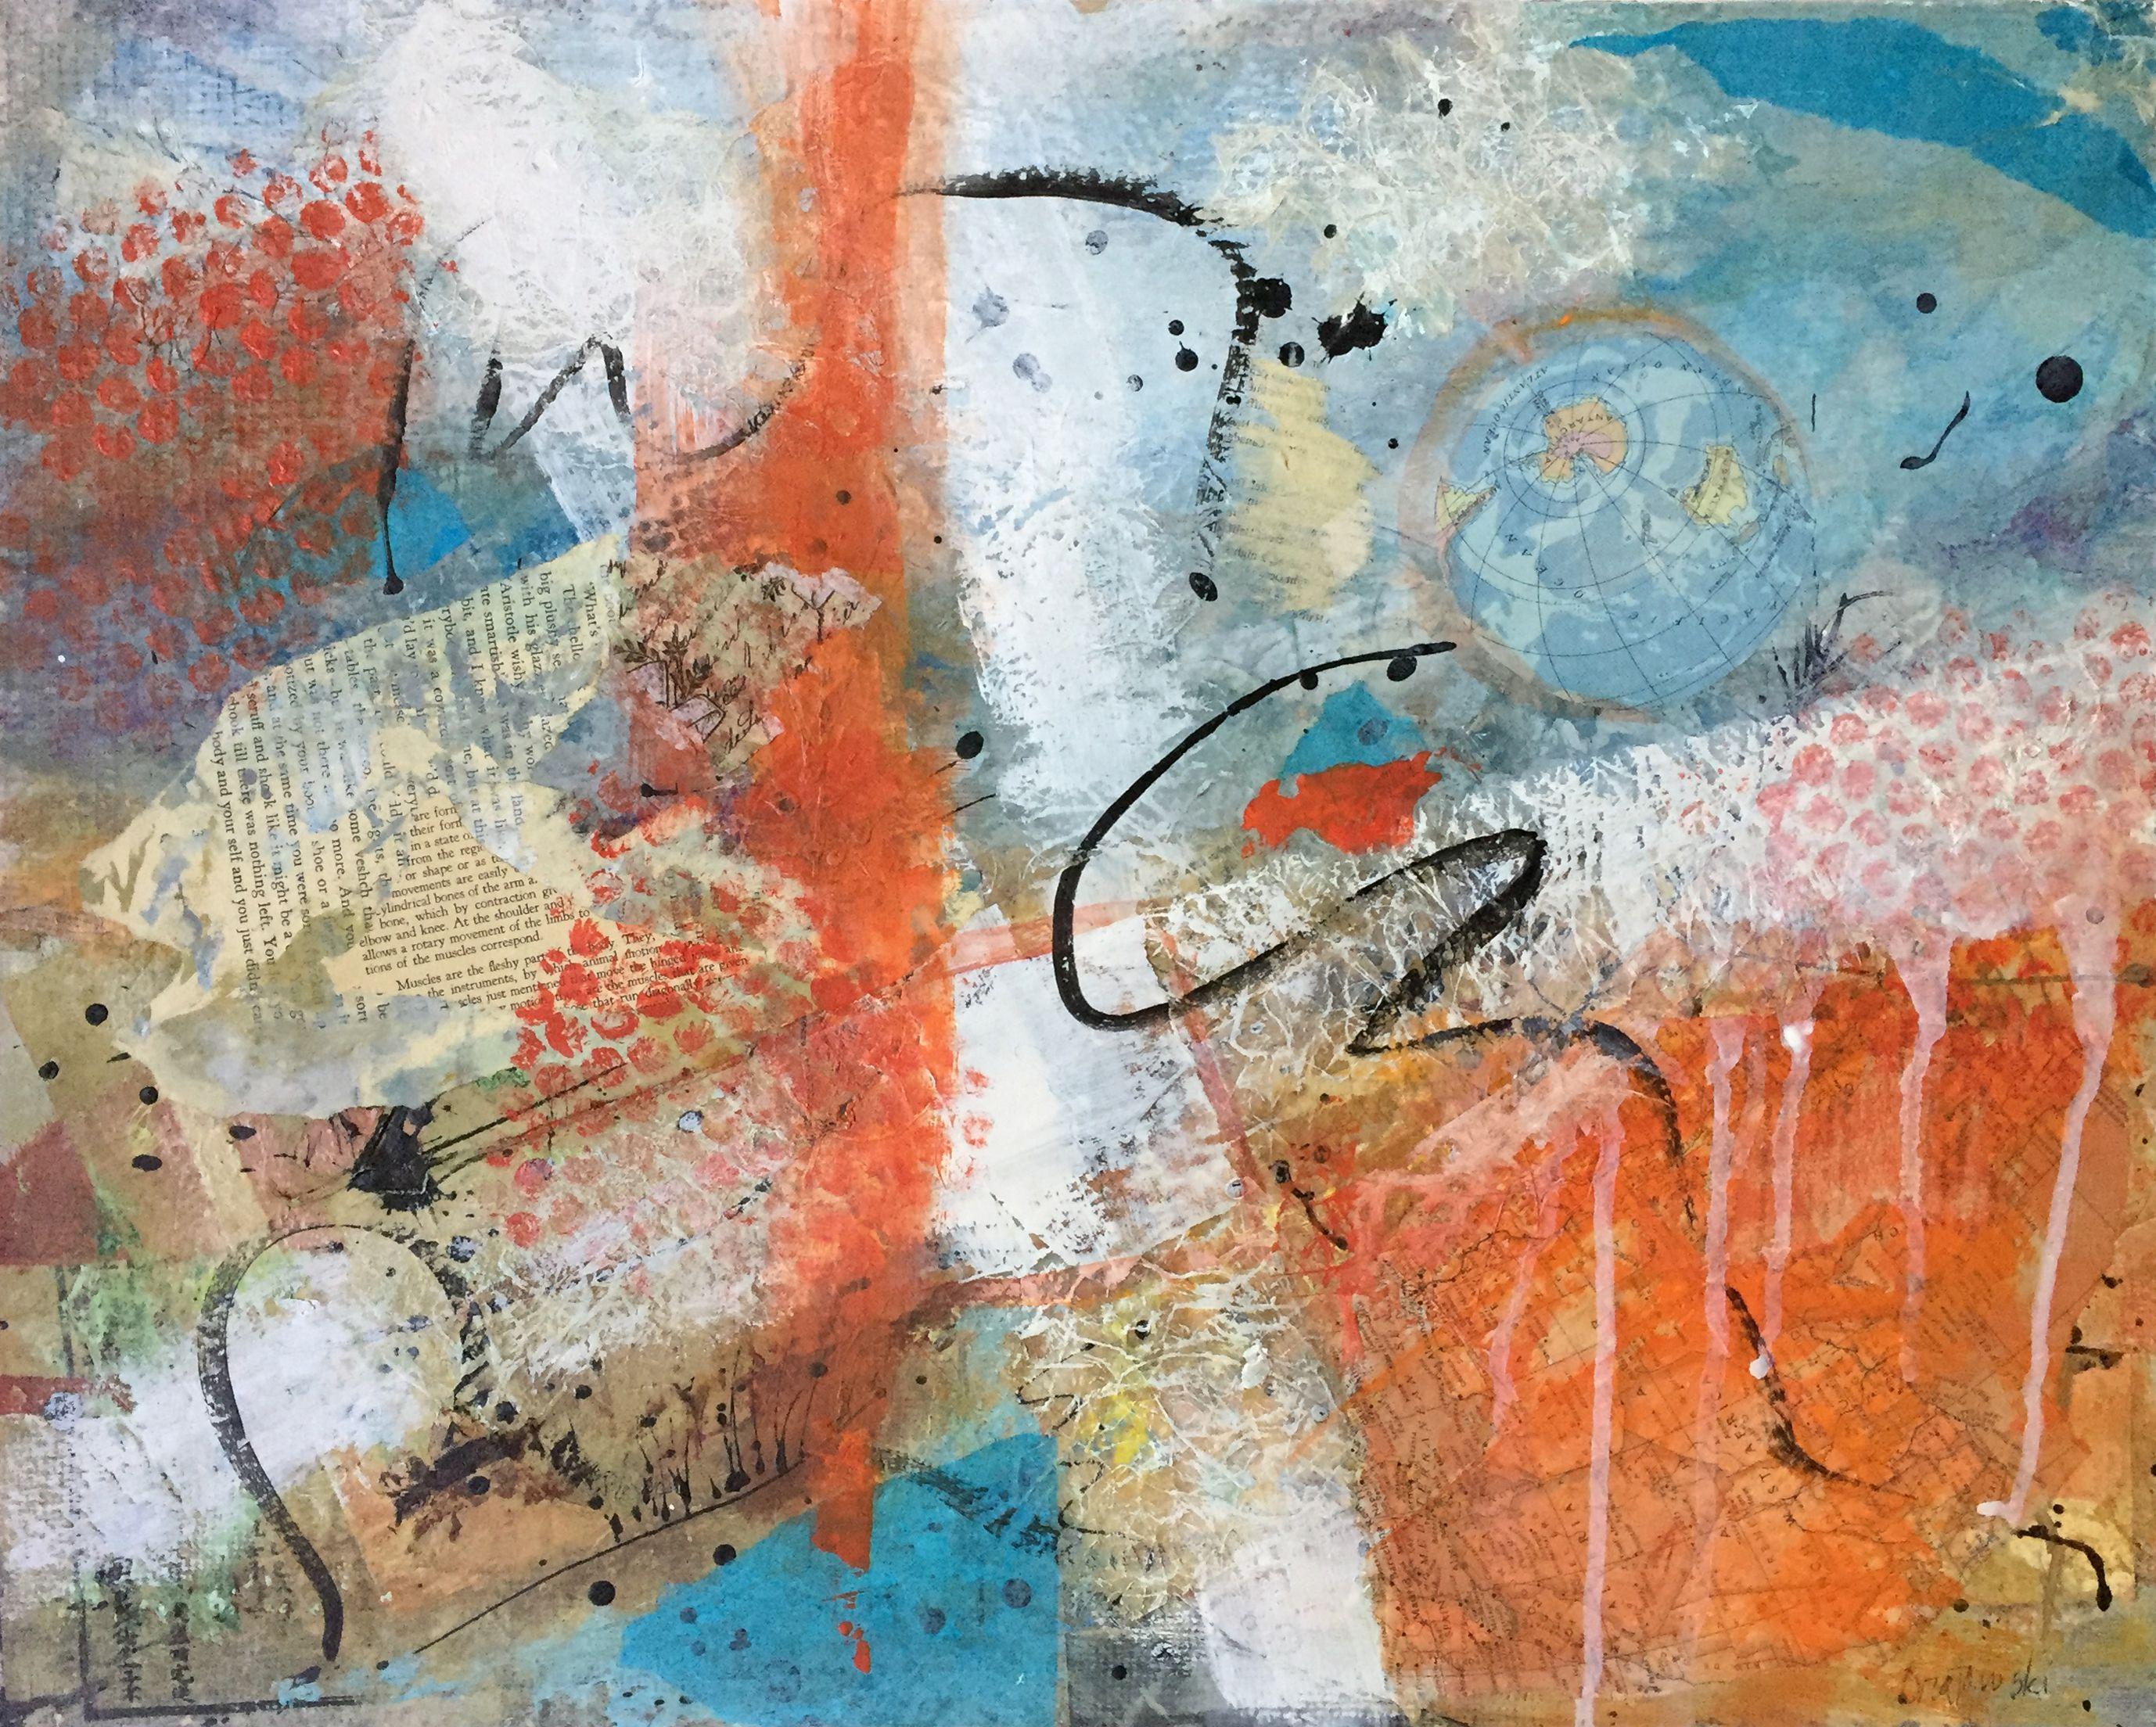 Fish Out of Water, Mixed Media on MDF Panel - Mixed Media Art by Letty Oratowski